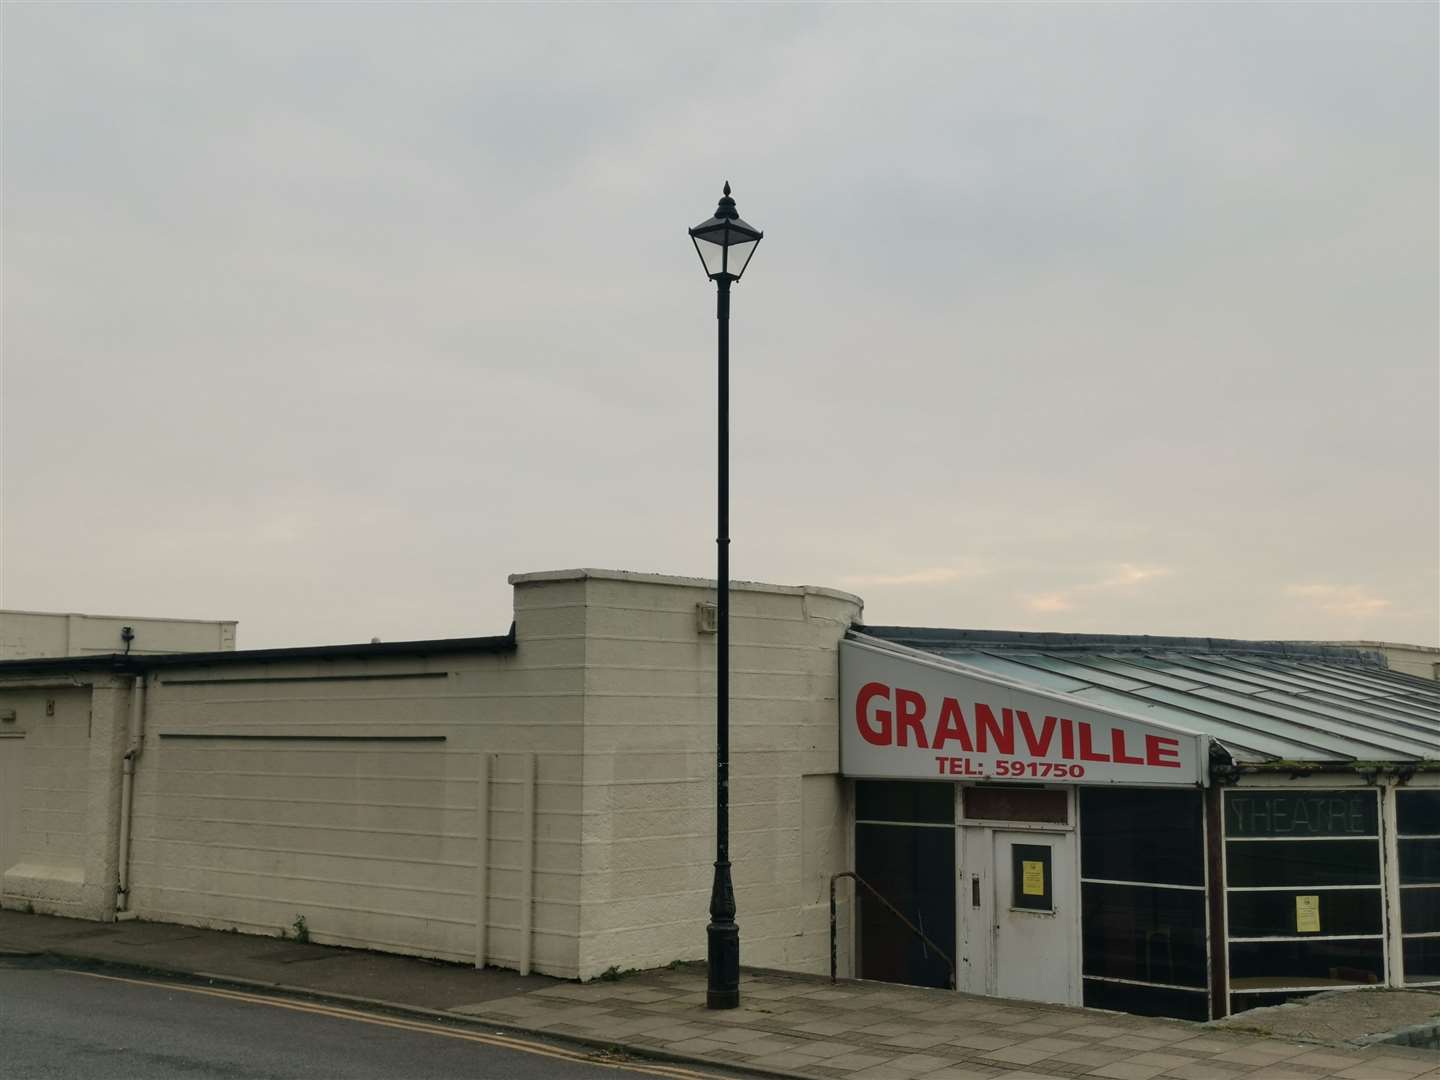 The Granville Theatre in Ramsgate is being renovated